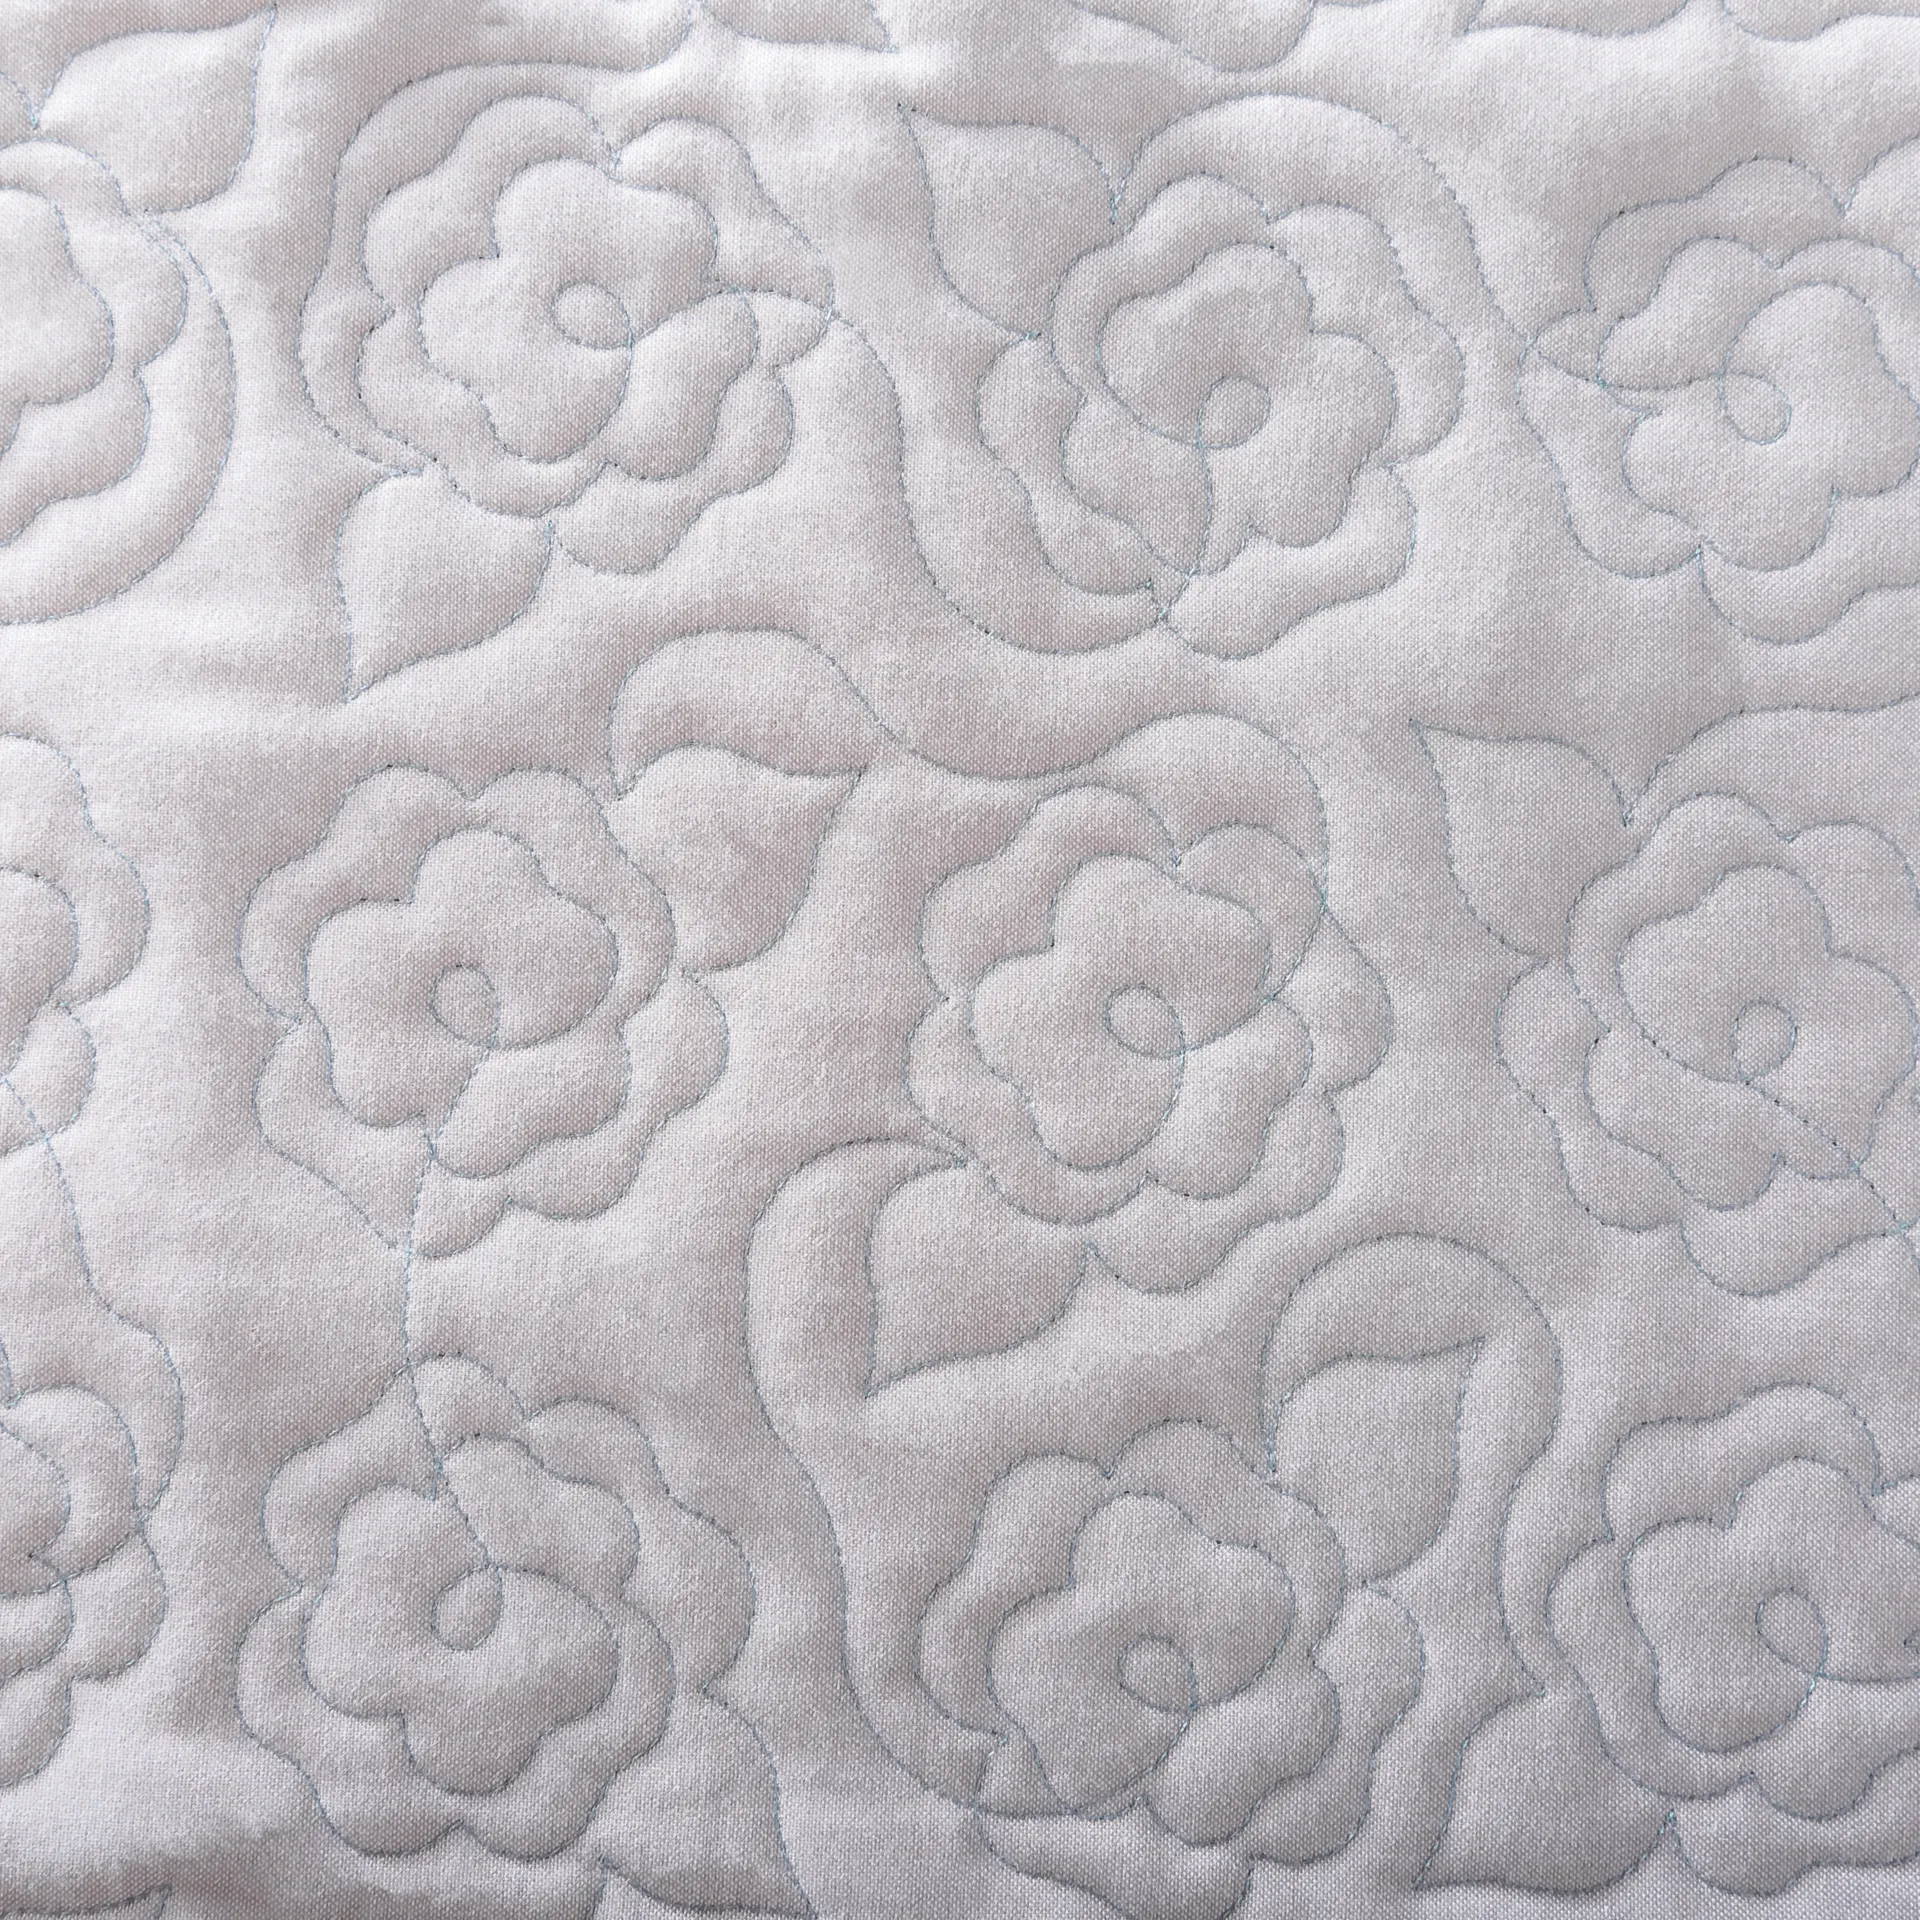 simply roses machine quilting pattern